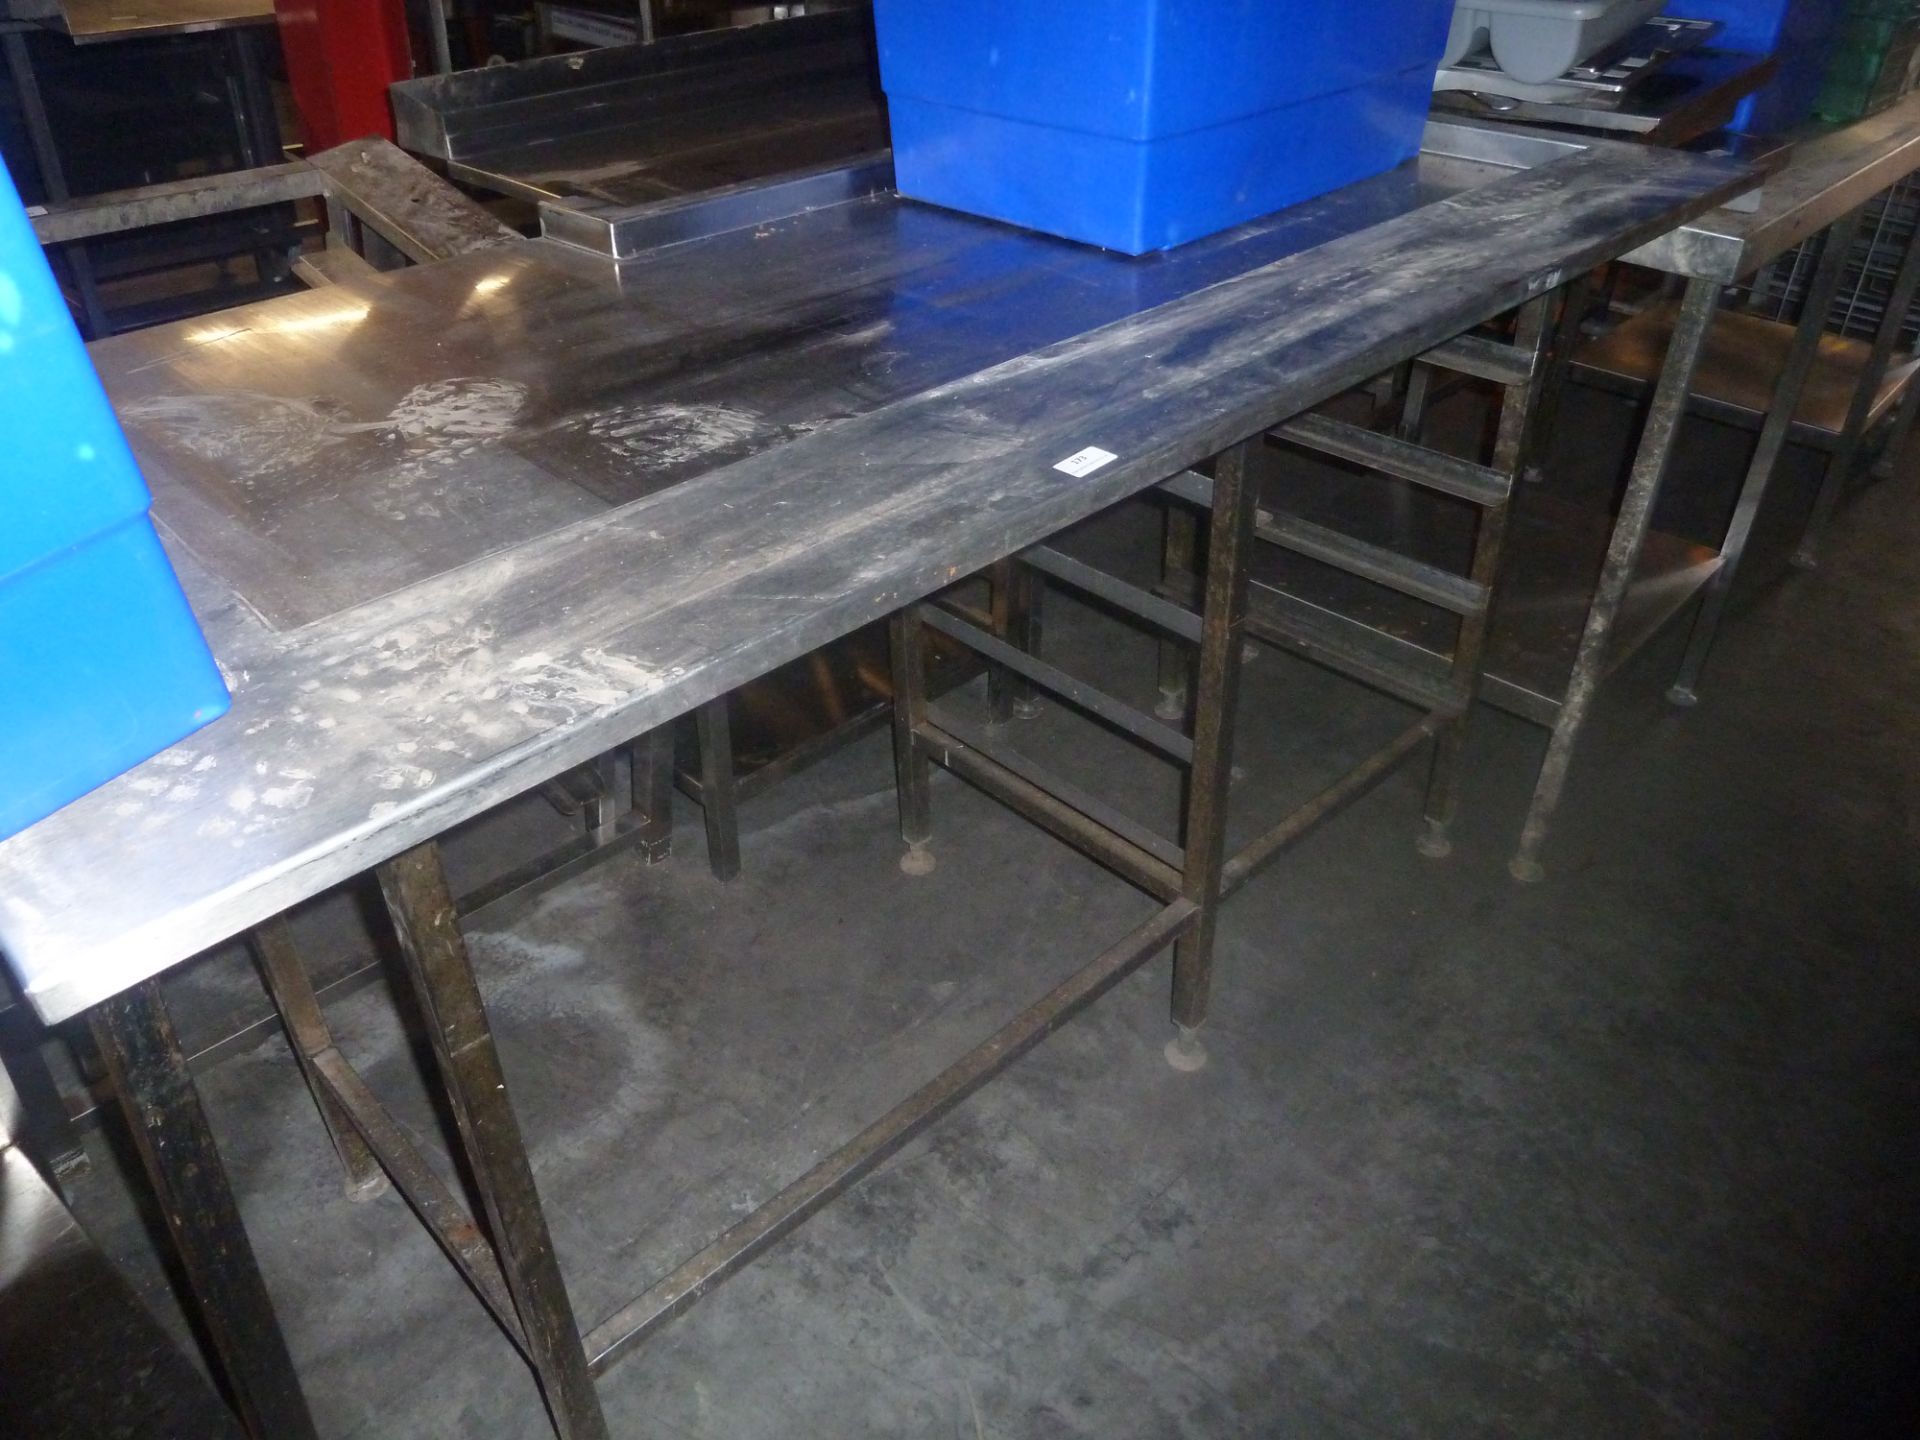 * 600w*725d*950h stainless steel worktop with space for bakery racks